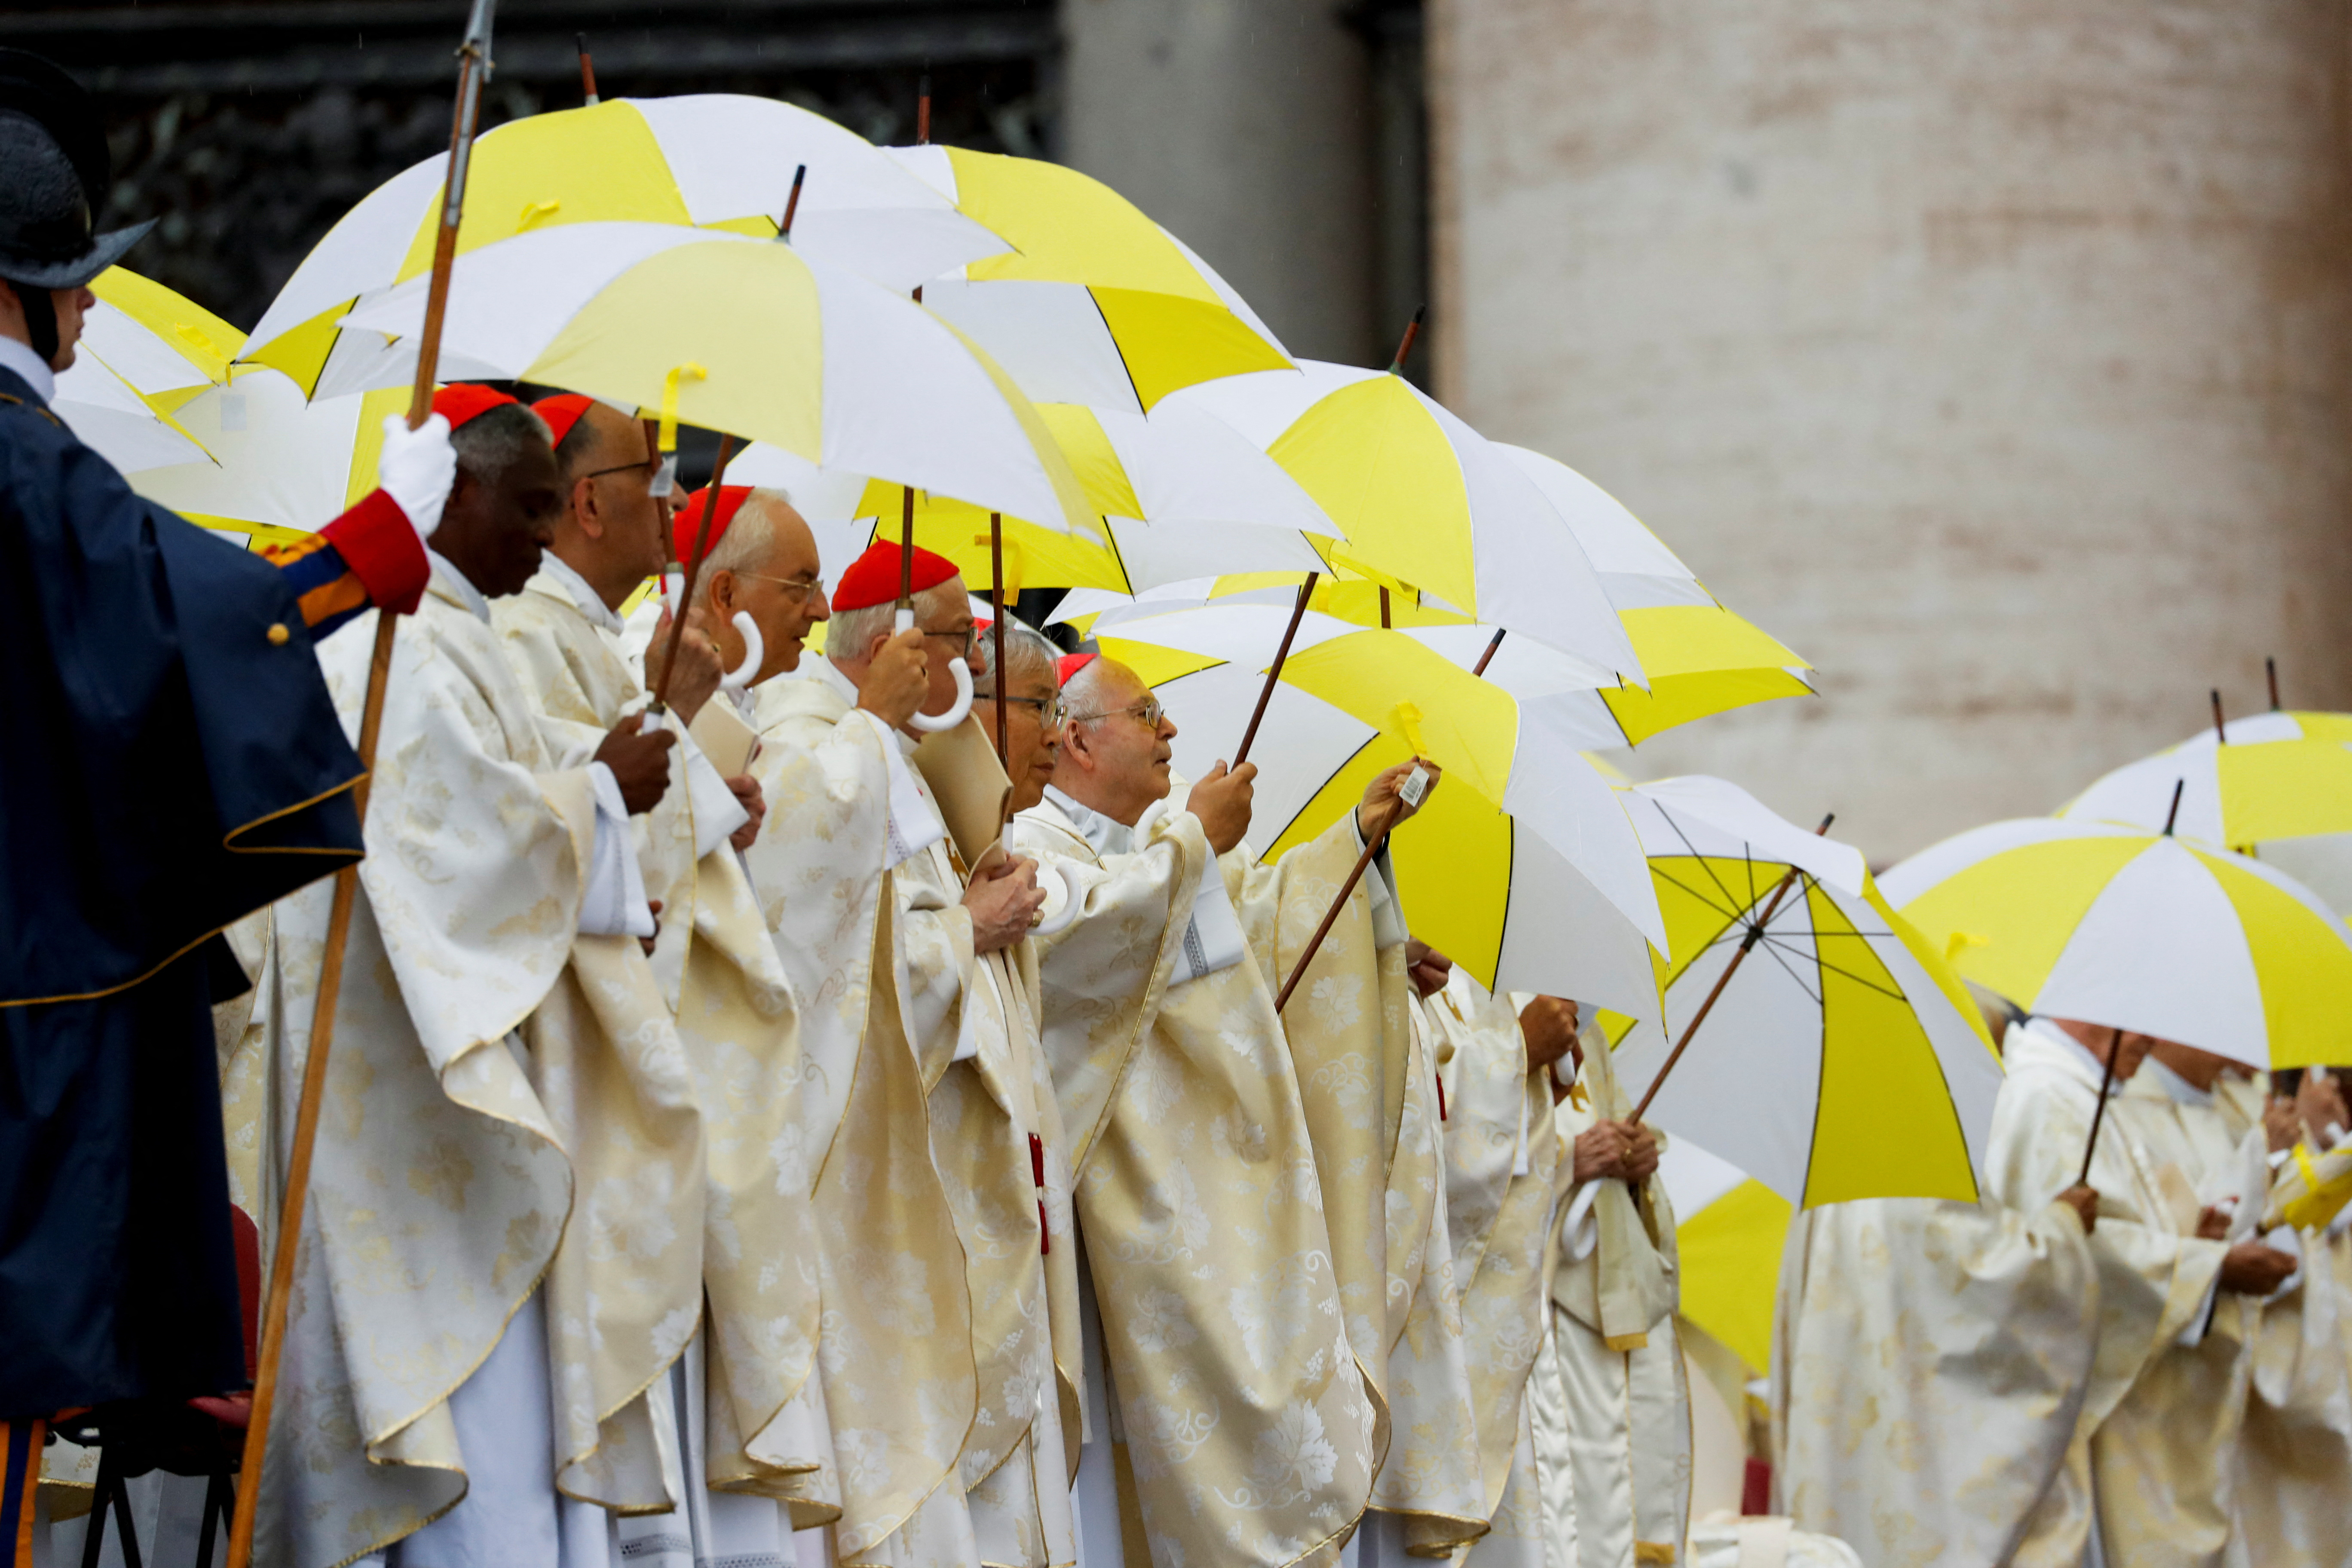 Cardinals attend a mass for the beatification of Pope John Paul I in St. Peter's Square at the Vatican on September 4, 2022.  (REUTERS/Remo Casilli)